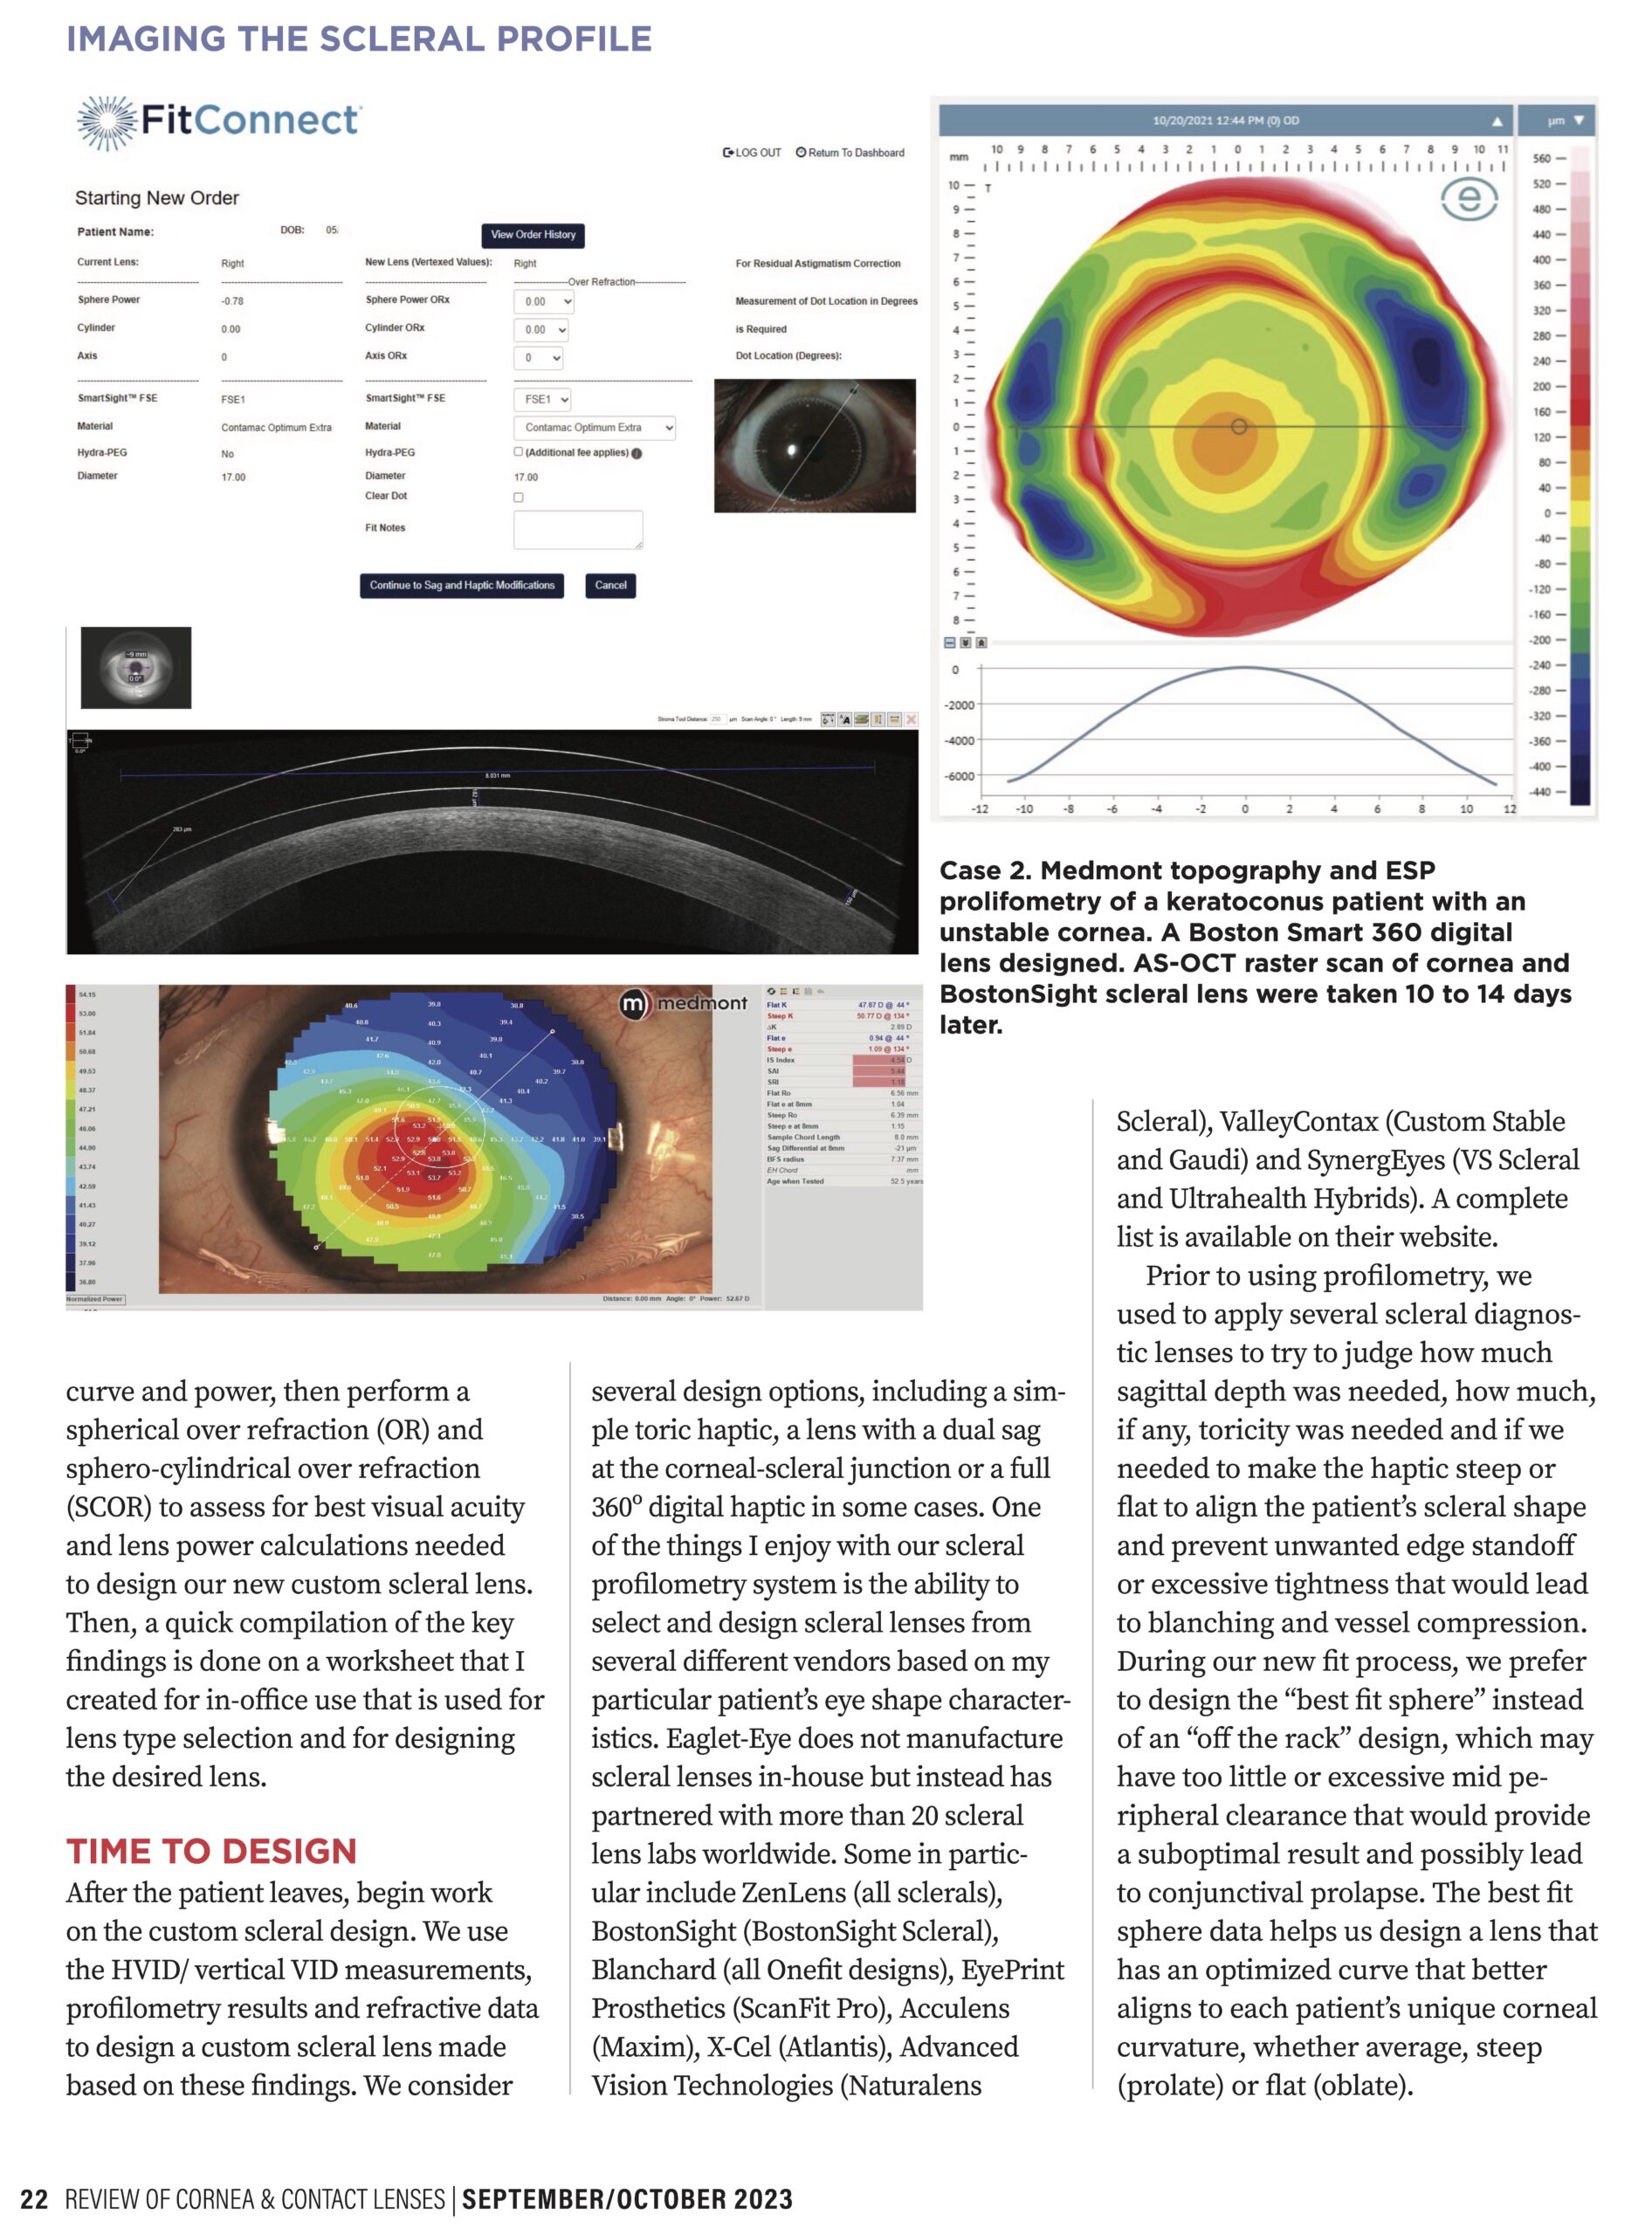 Imaging the Scleral Profile for Enhanced Scleral Lens Results By Joseph DiGiorgio, OD. Page 3